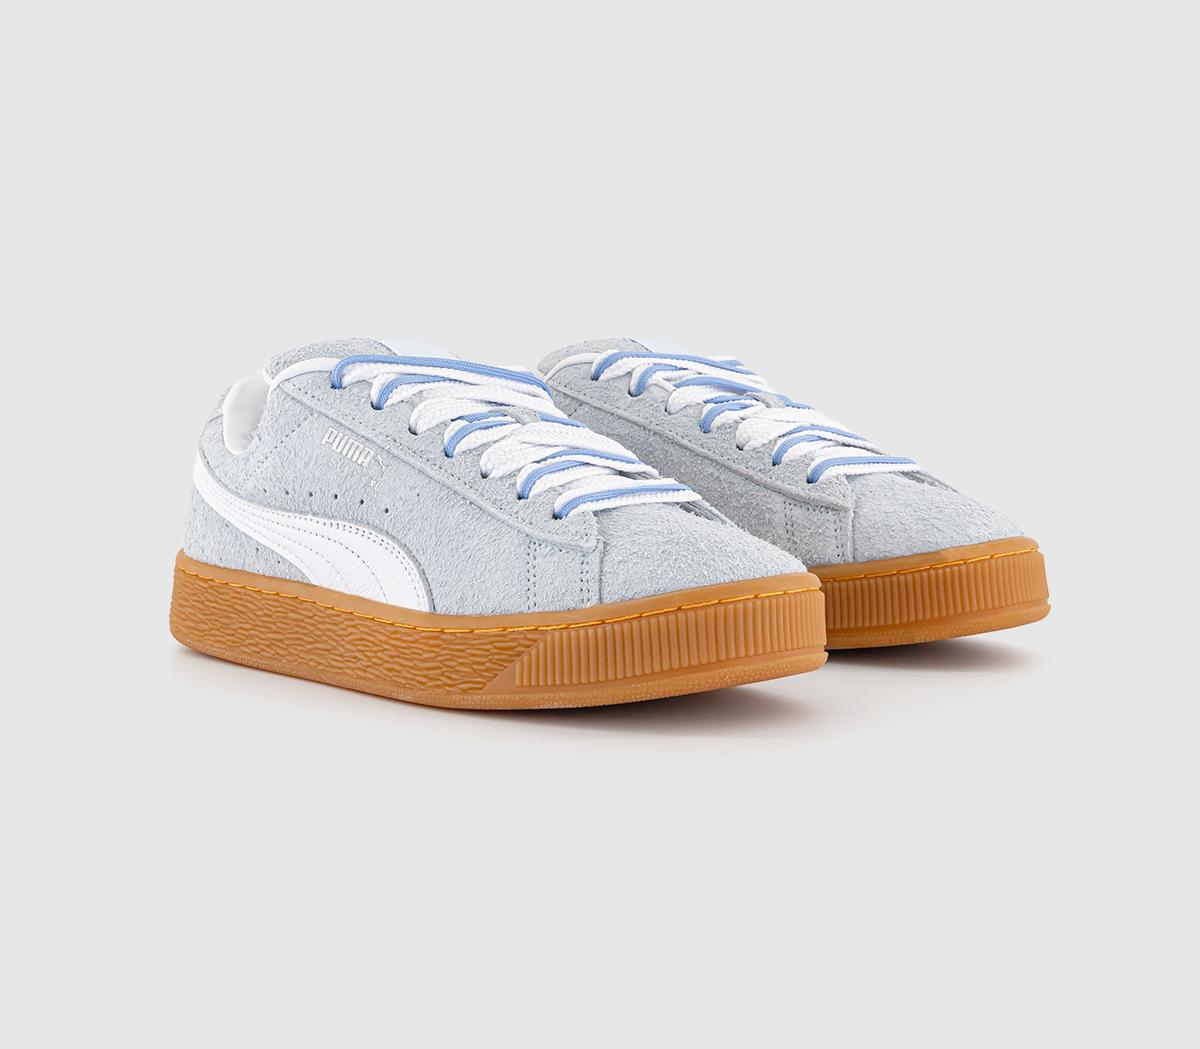 Puma Womens Suede Xl Trainers Icy Blue White Silver, 3